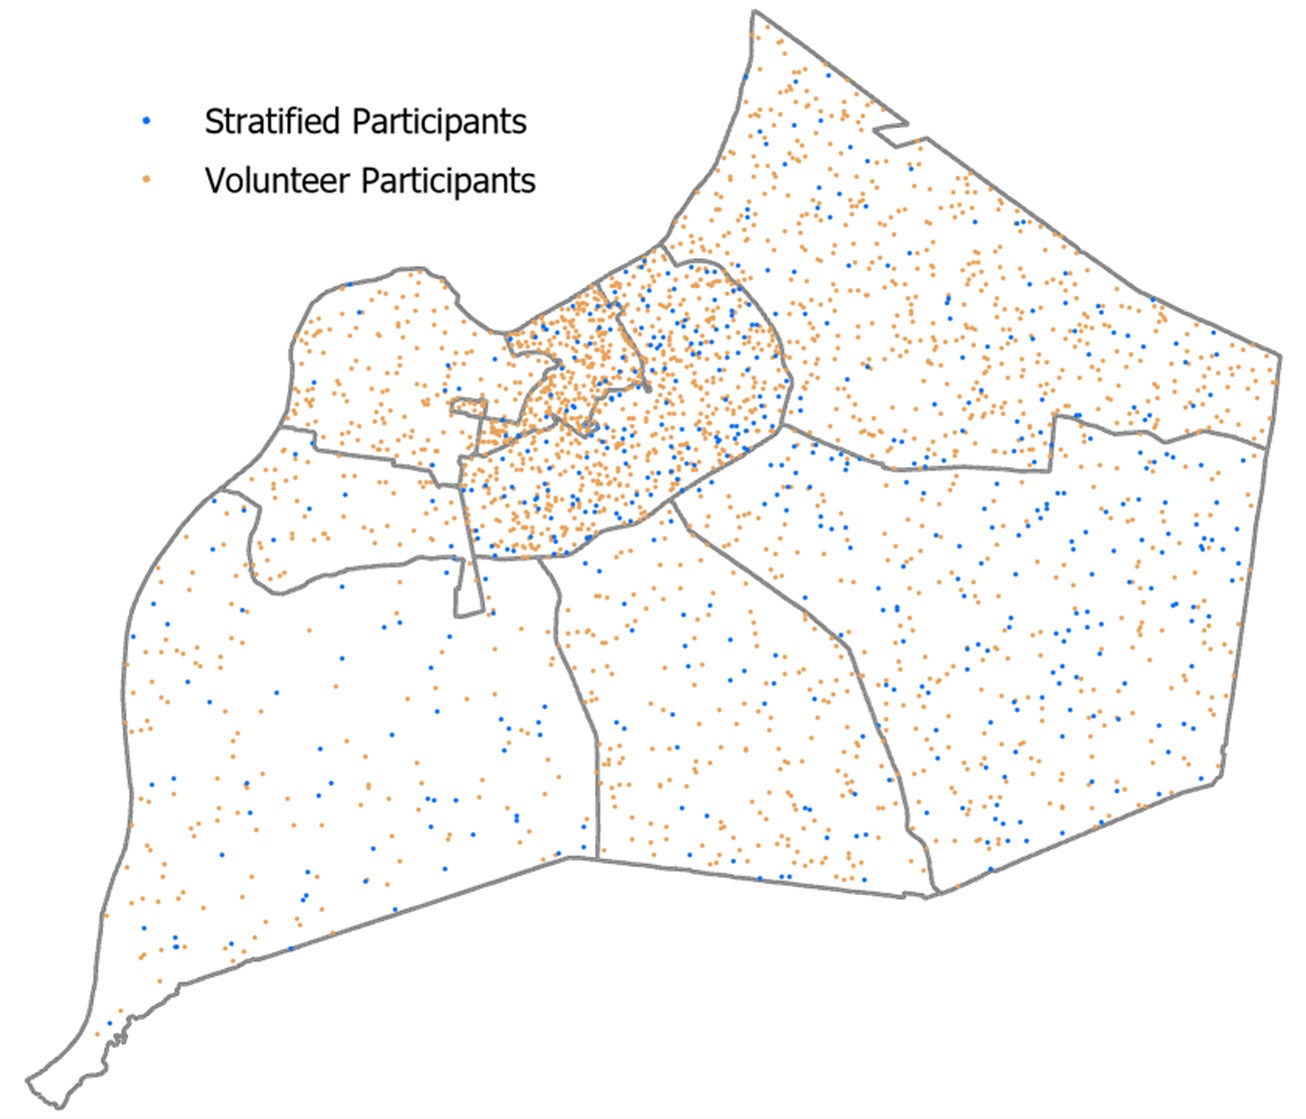 Map 1:  Residential location of individuals tested for SAR-CoV-2 infection. Blue dots are participants who responded to mailed invitations (stratified), orange dots are individuals who self-volunteered for testing.